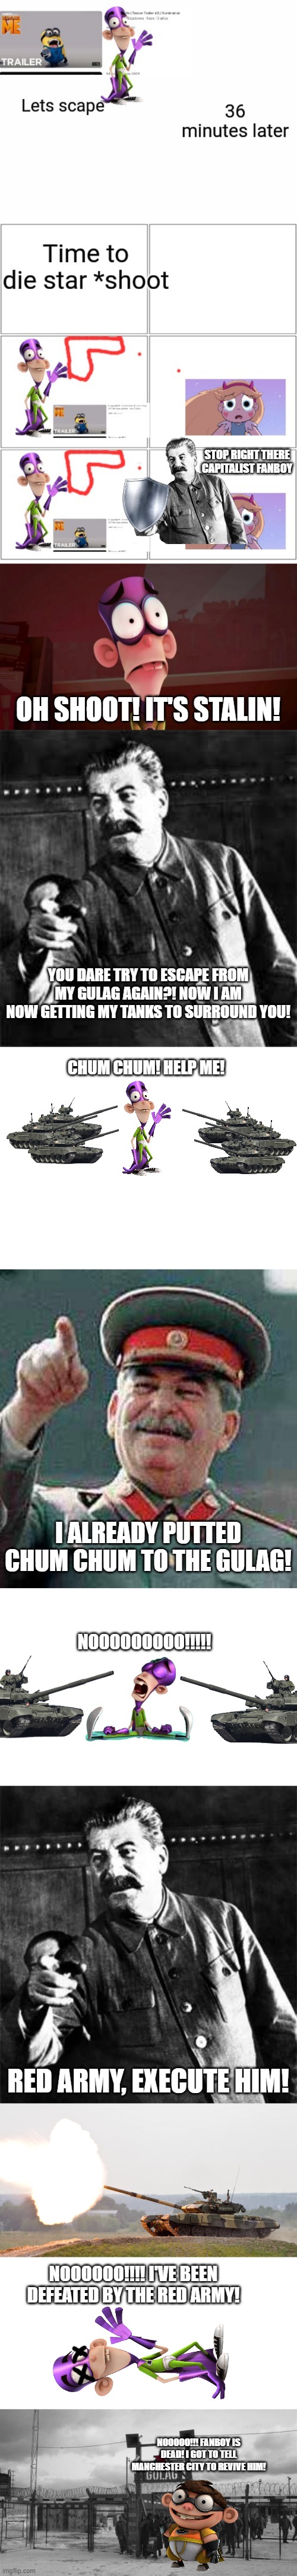 STOP RIGHT THERE CAPITALIST FANBOY; OH SHOOT! IT'S STALIN! YOU DARE TRY TO ESCAPE FROM MY GULAG AGAIN?! NOW I AM NOW GETTING MY TANKS TO SURROUND YOU! CHUM CHUM! HELP ME! I ALREADY PUTTED CHUM CHUM TO THE GULAG! NOOOOOOOOO!!!!! RED ARMY, EXECUTE HIM! NOOOOOO!!!! I'VE BEEN DEFEATED BY THE RED ARMY! NOOOOO!!! FANBOY IS DEAD! I GOT TO TELL MANCHESTER CITY TO REVIVE HIM! | image tagged in joseph stalin go to gulag,blank white template,stalin says,stalin,gulag | made w/ Imgflip meme maker